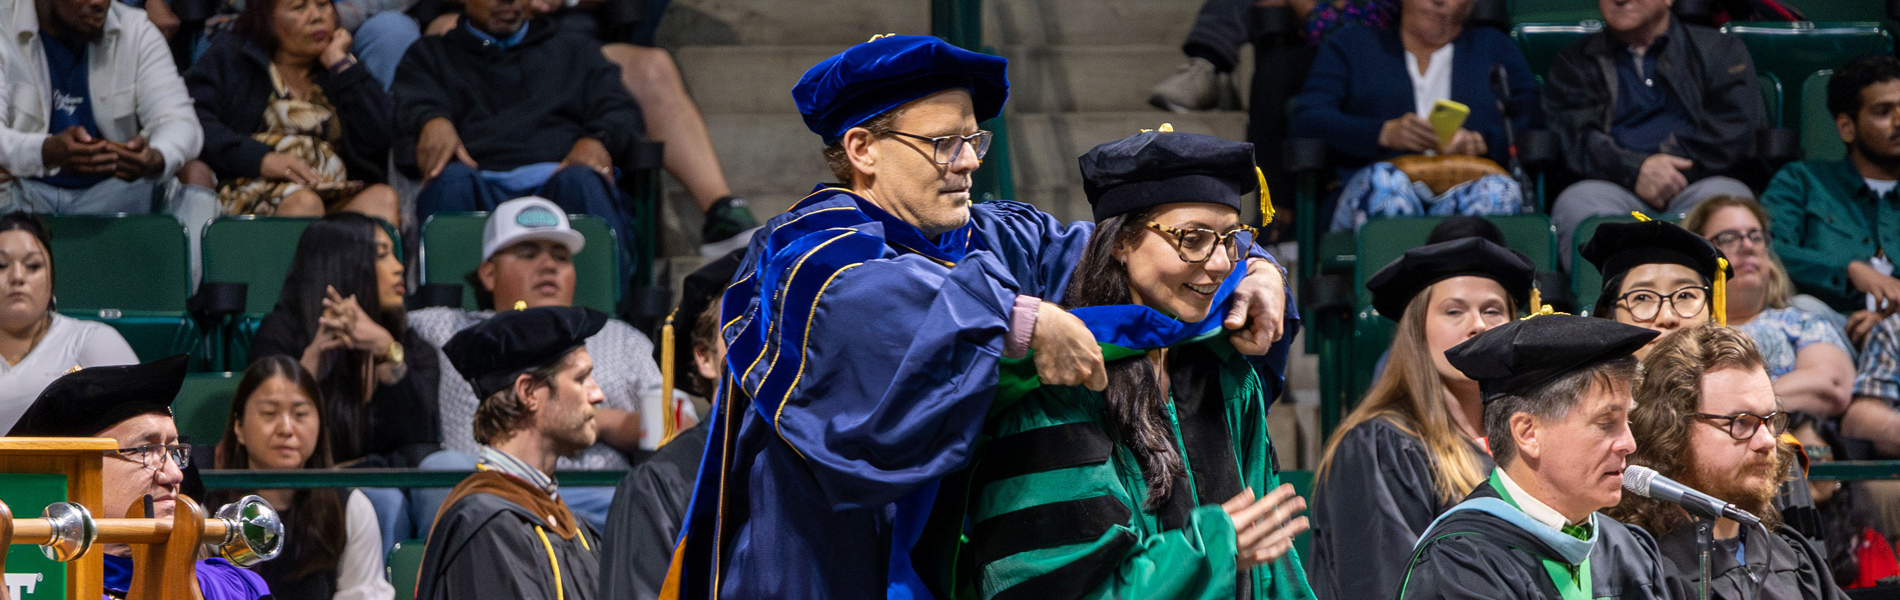 A man placing a sash over a new graduate at a commencement ceremony